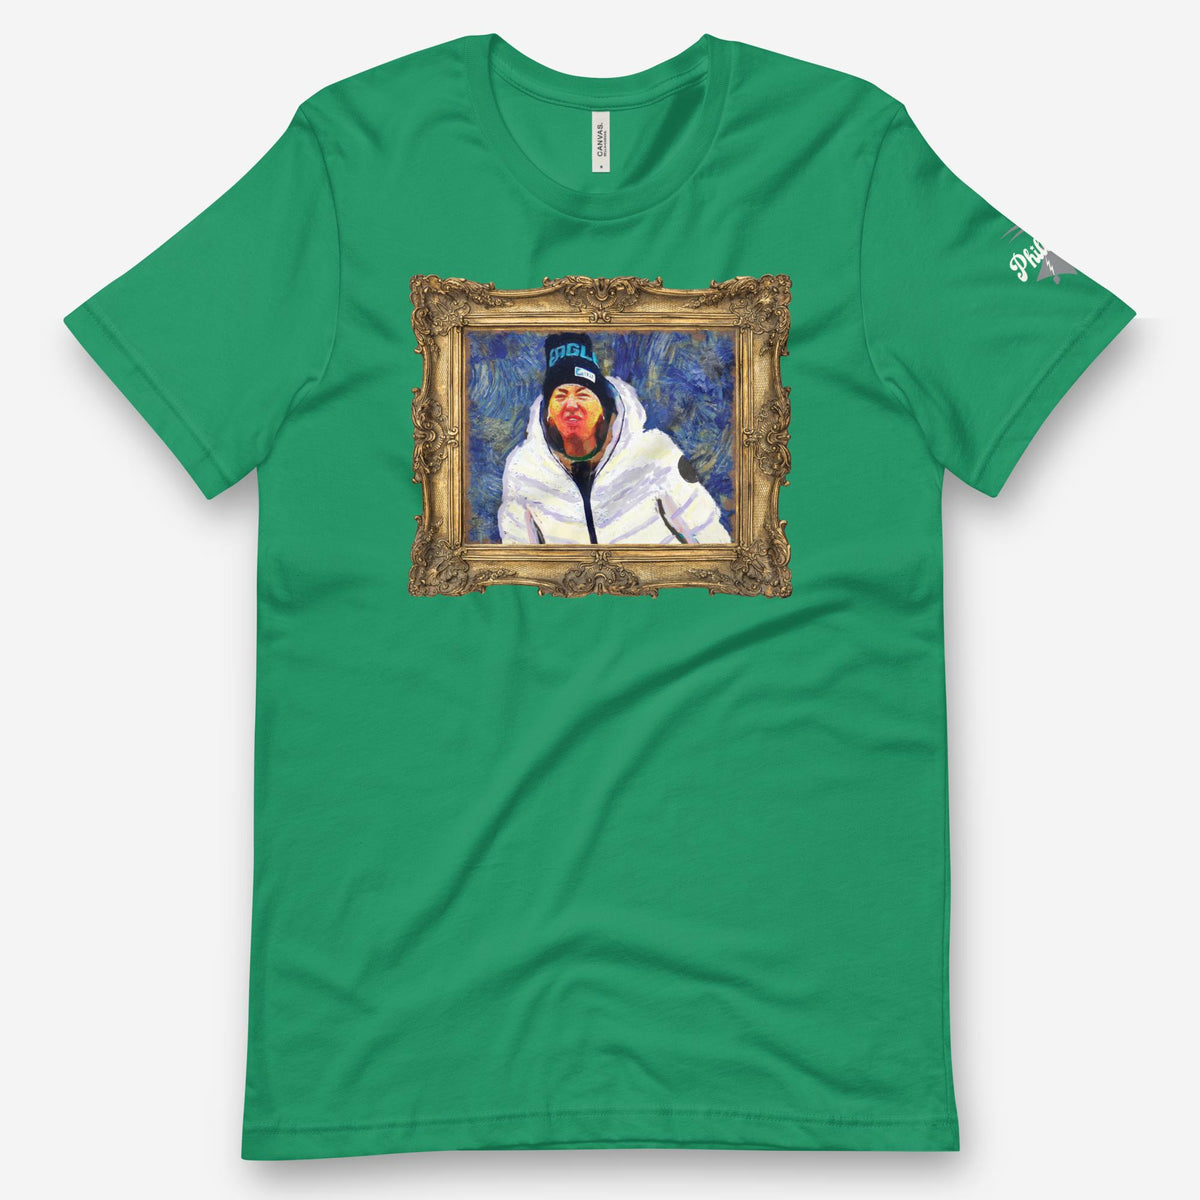 &quot;Angry Lady Birds Fan Mid-Obscenity Masterpiece&quot; Tee